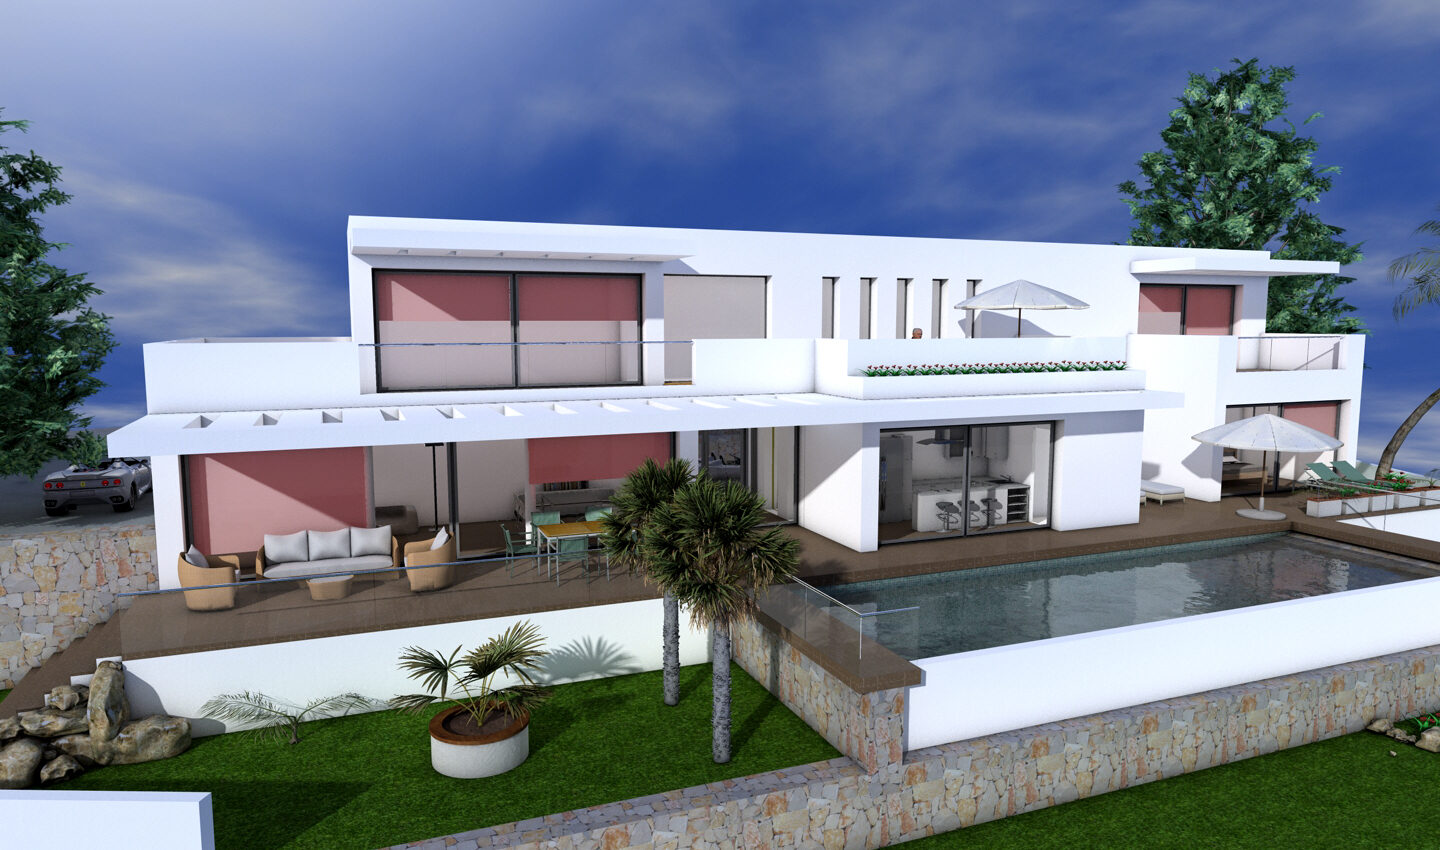 Luxury 3 bedroom and 3 bathroom Villa to be constructed. 10 Minutes walk to Moraira and the Coast